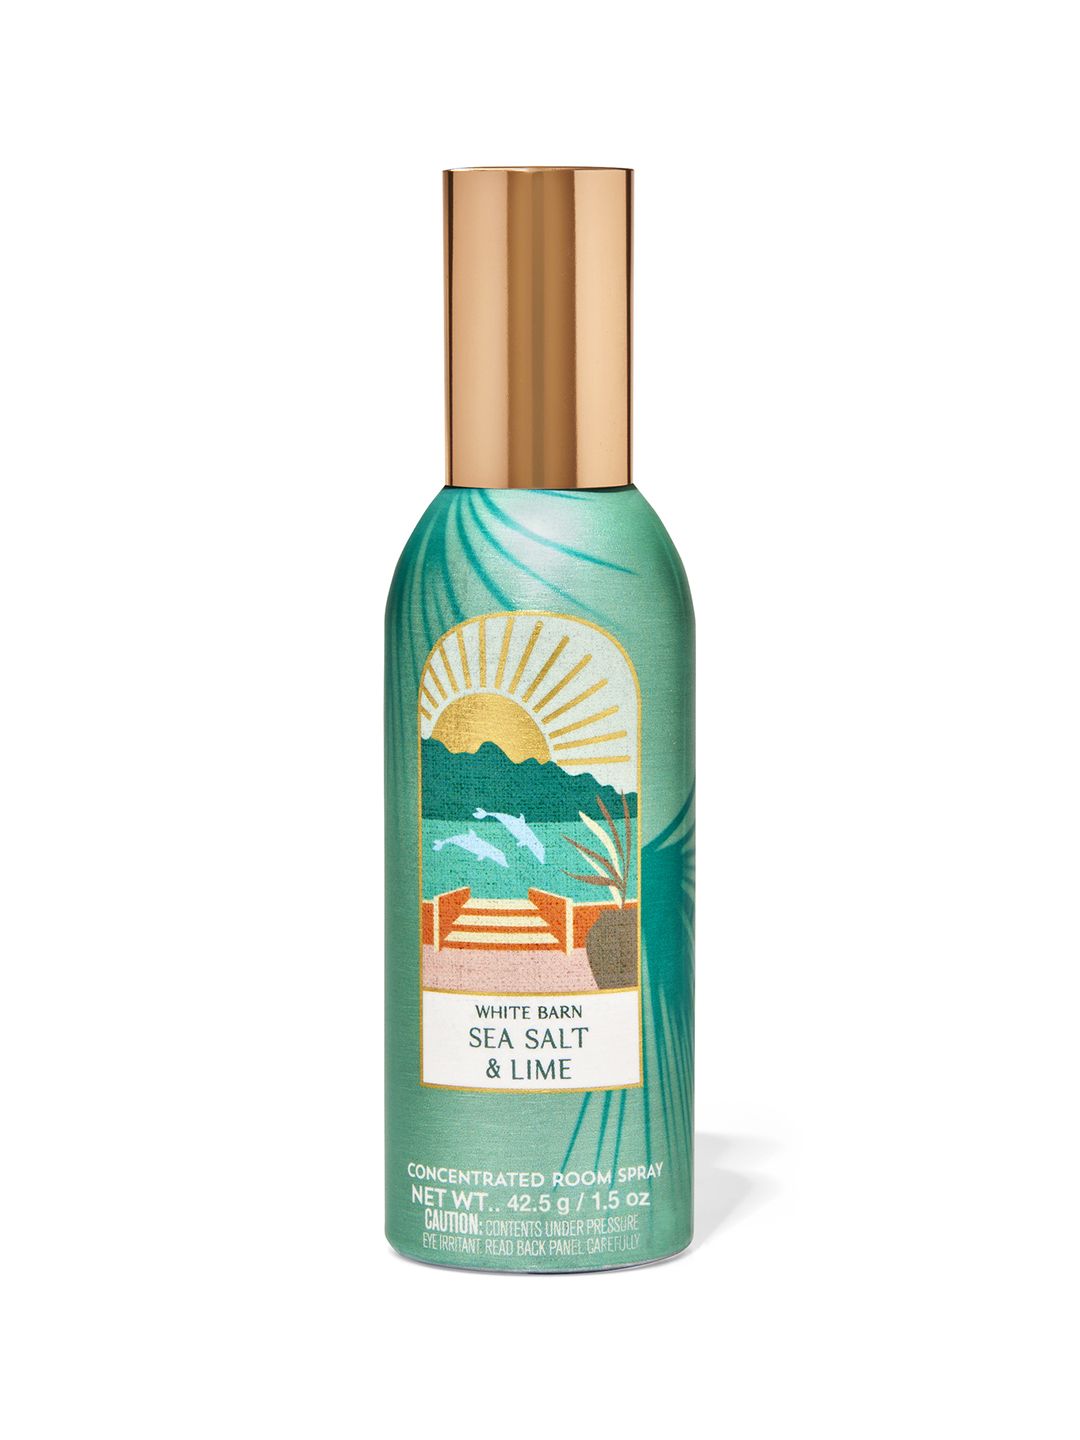 Bath & Body Works White Barn Sea Salt & Lime Concentrated Room Spray - 42.5 g Price in India